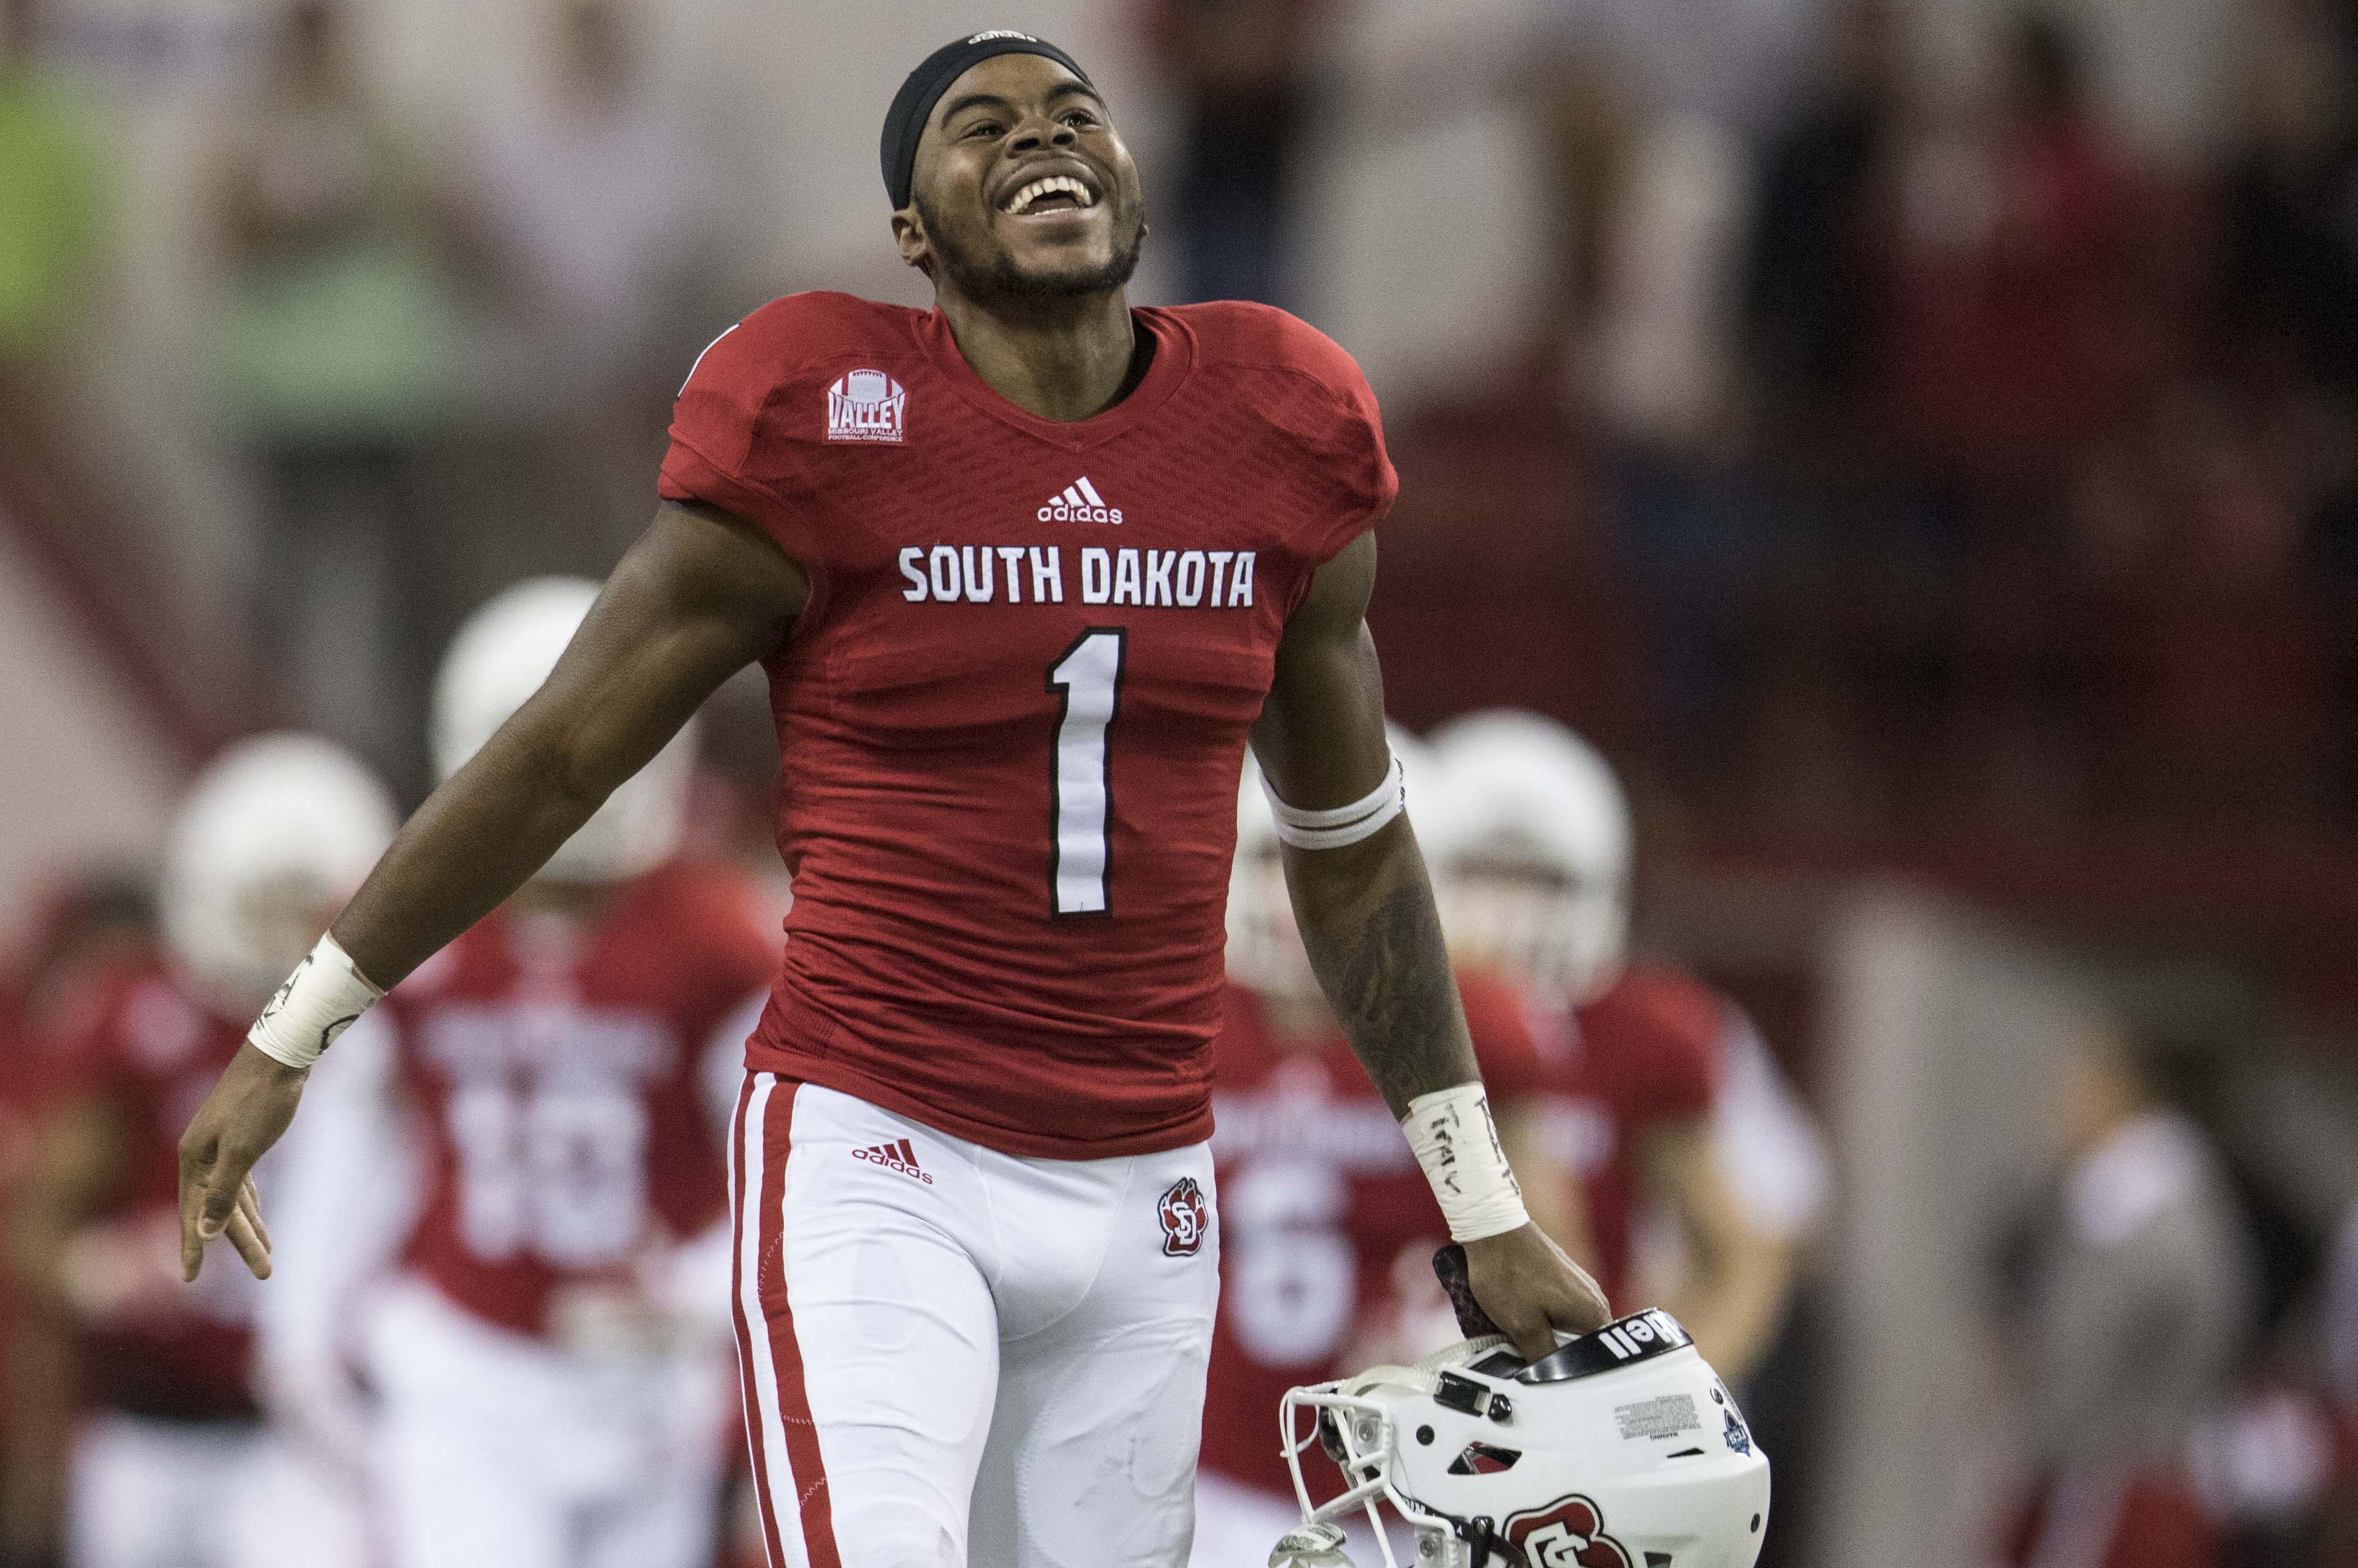 ‘Football means hope’: Brooks reflects on career at USD, overcoming obstacles